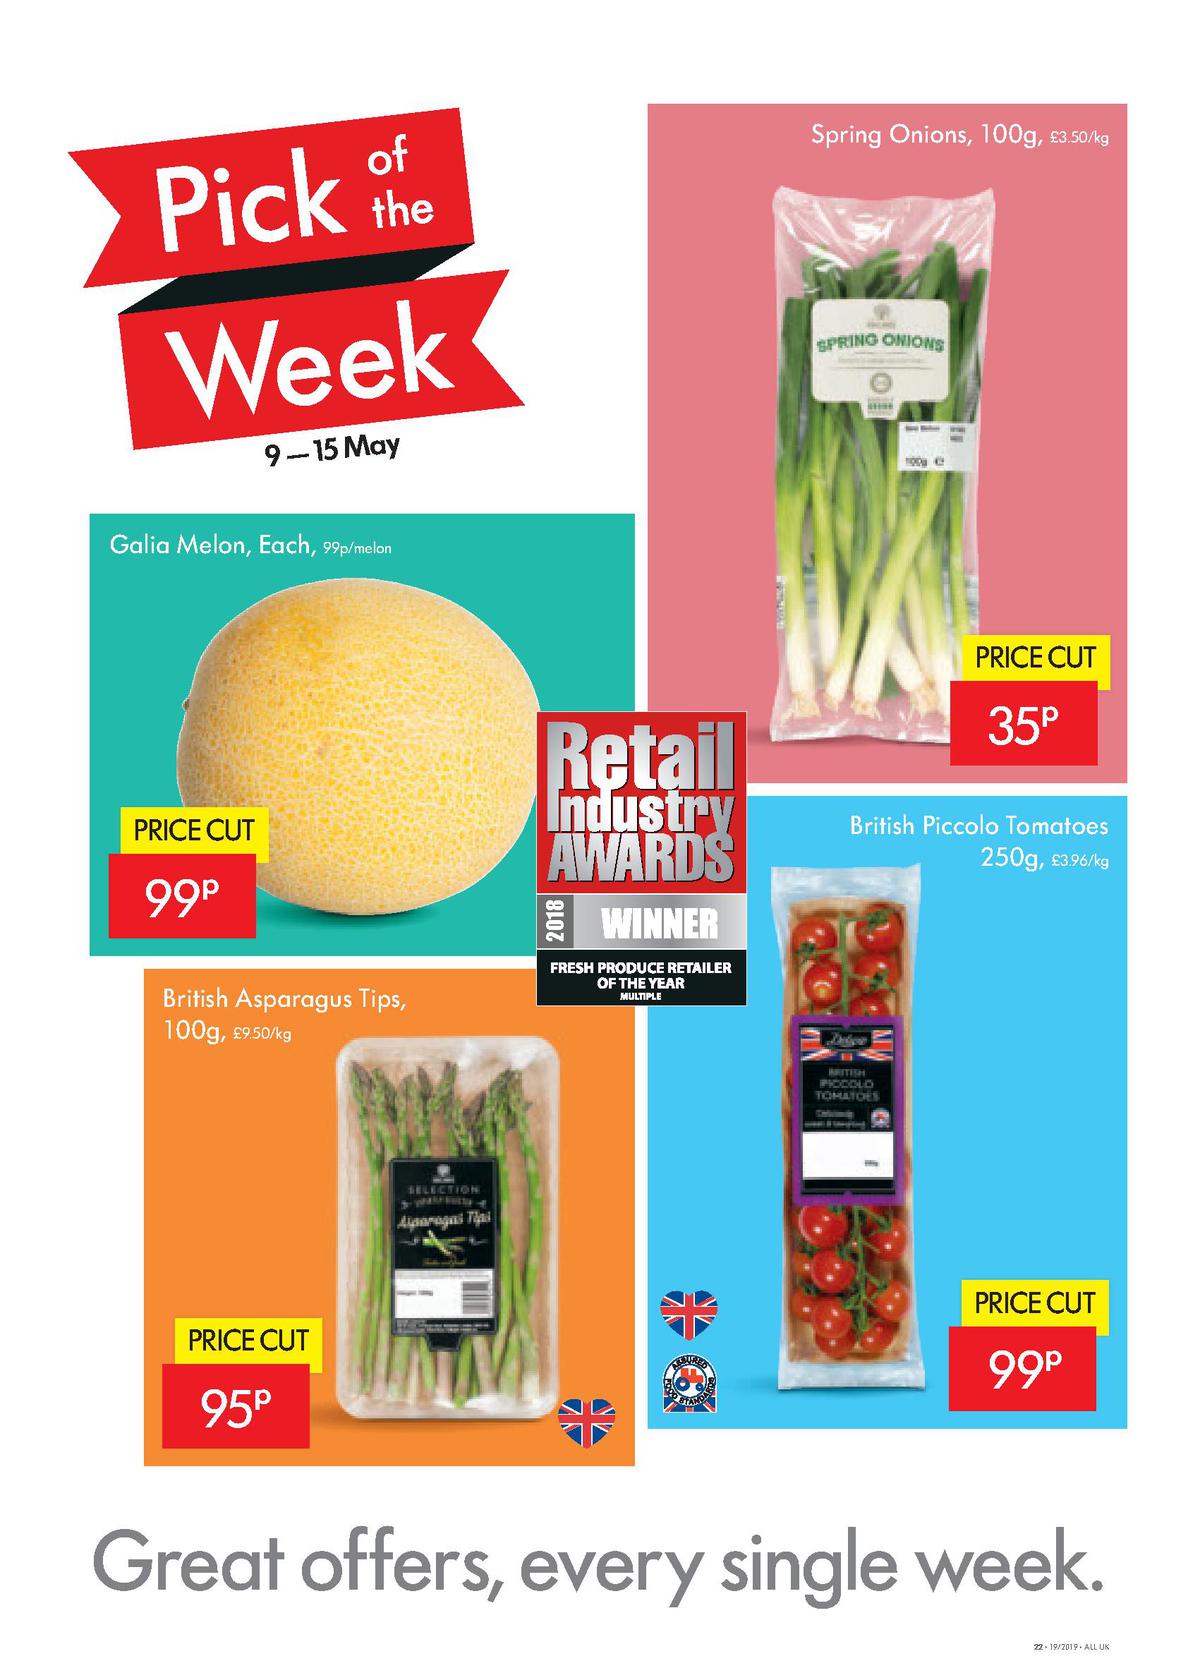 LIDL Offers from 9 May